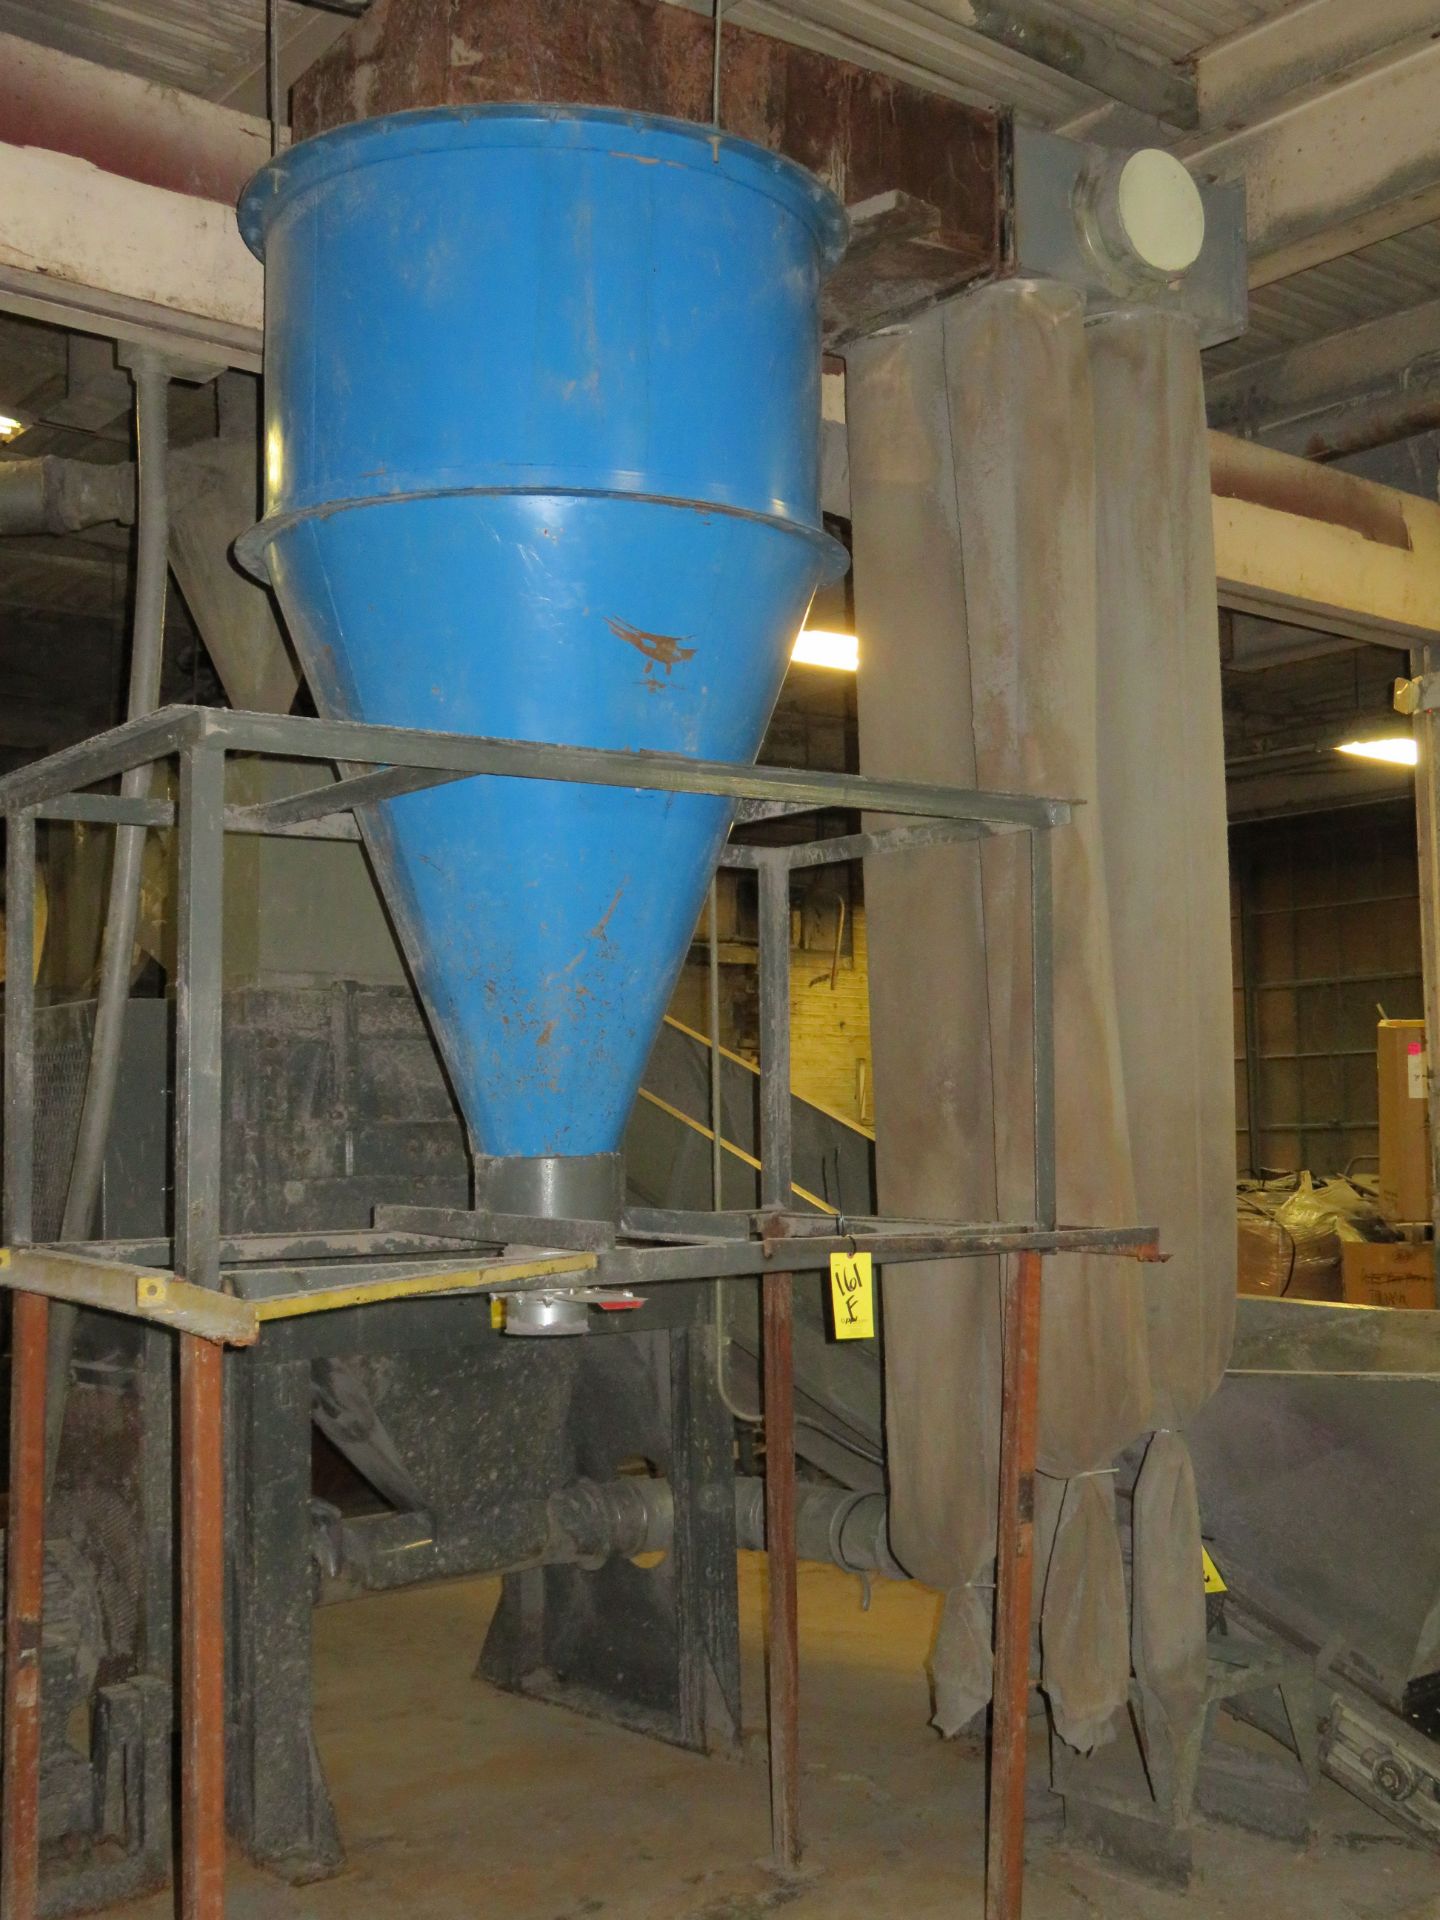 Single Cyclone 4-Bag Dust Collector, with Bottom Discharge (Euclid, OH)